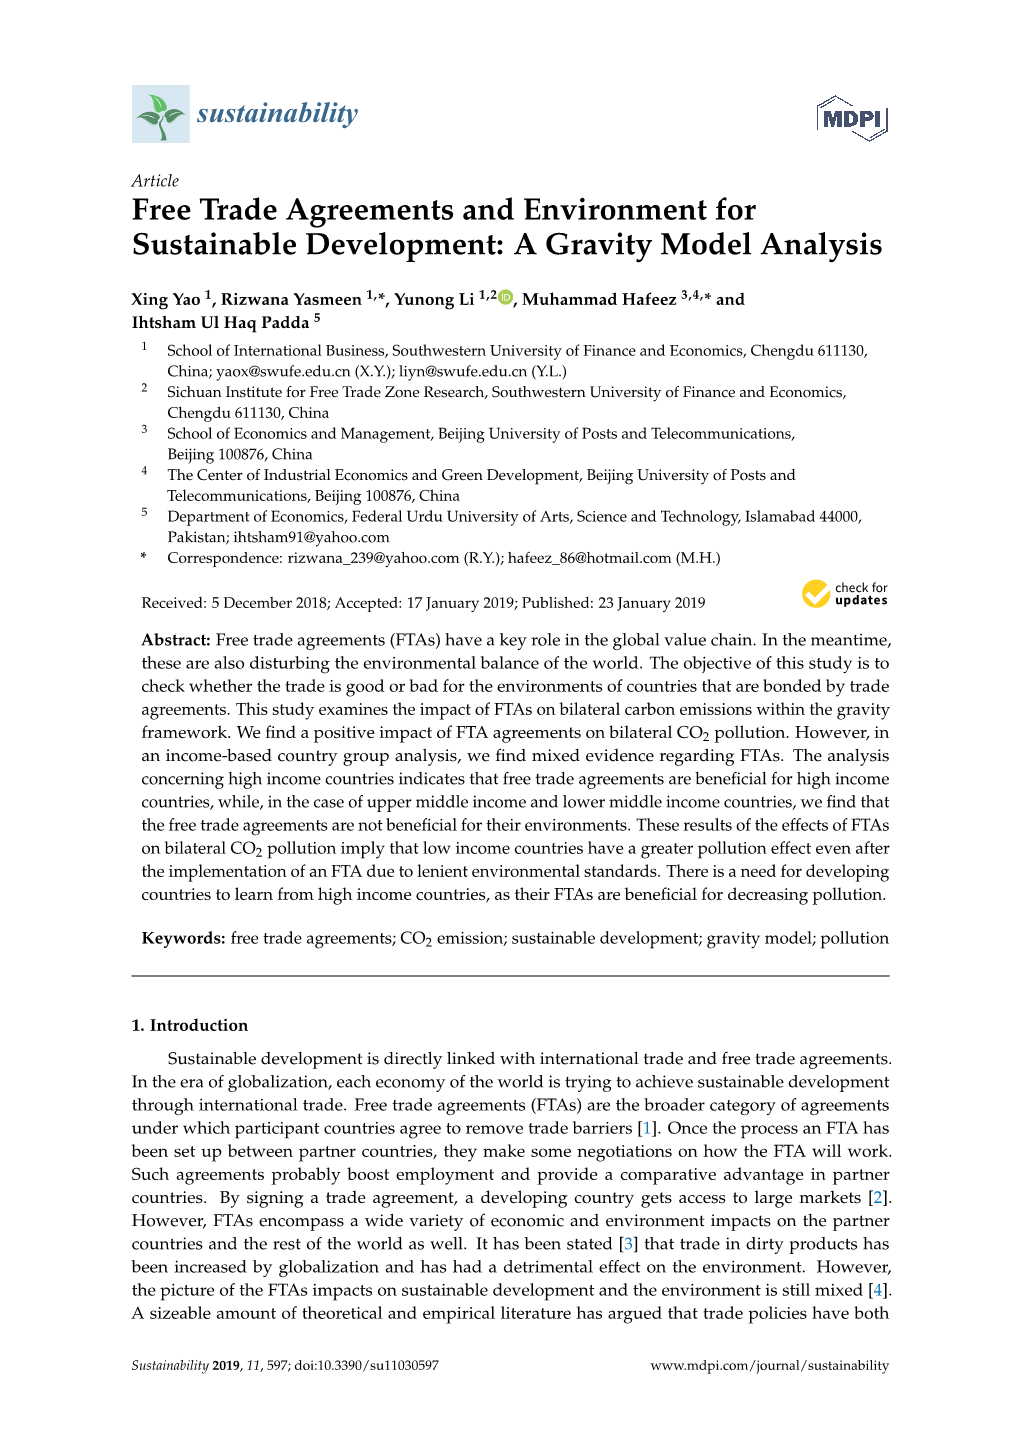 Free Trade Agreements and Environment for Sustainable Development: a Gravity Model Analysis